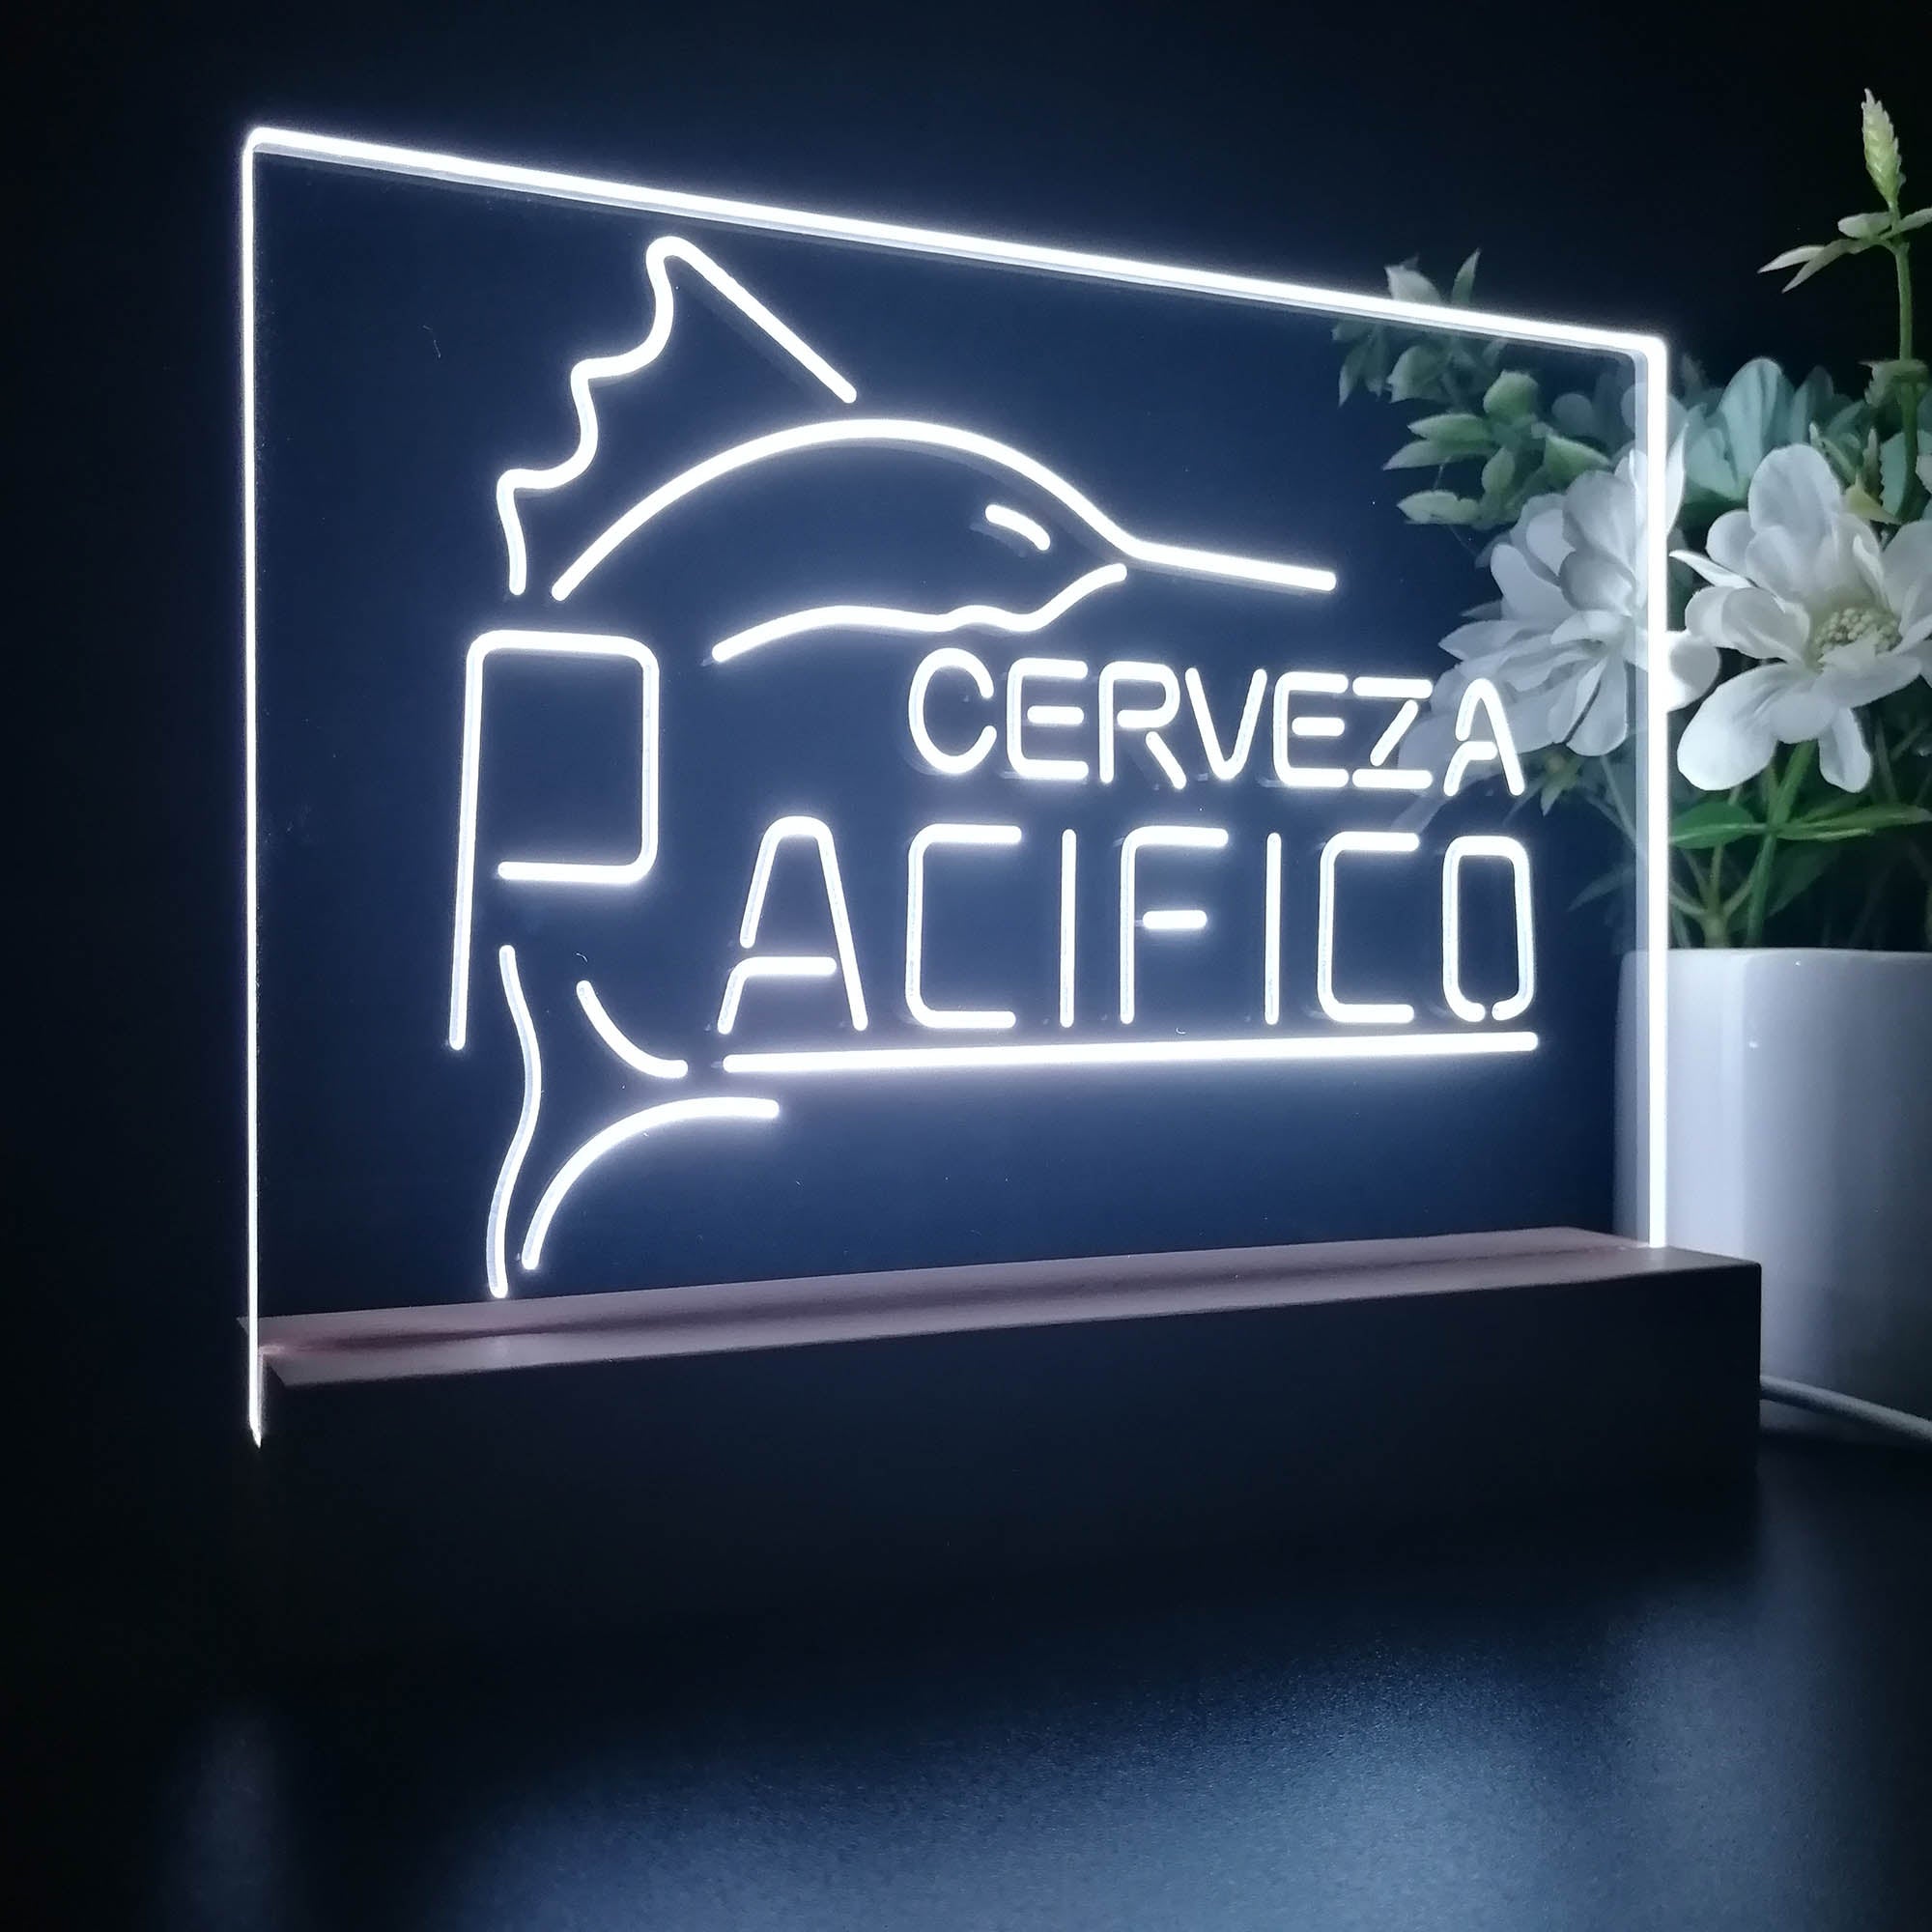 Cerveza Pacifico Large Marlin Night Light LED Sign